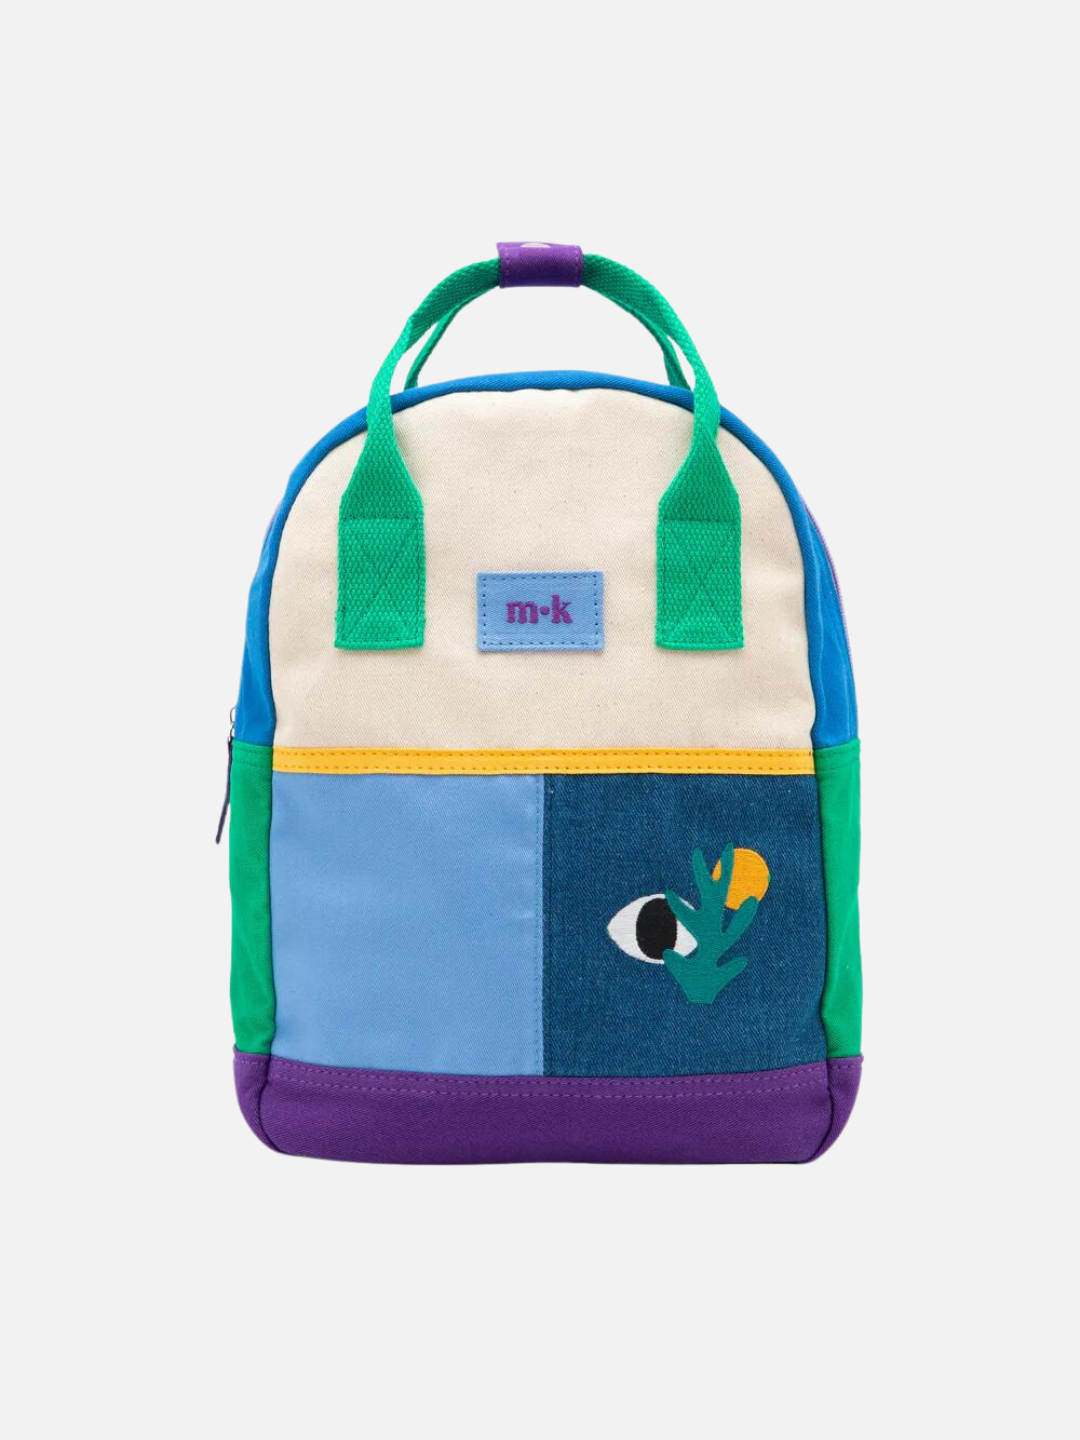 A colorblock backpack with green handles and sides, purple base and two blue patches below a cream top, one with images of an eye, a sun and a plant